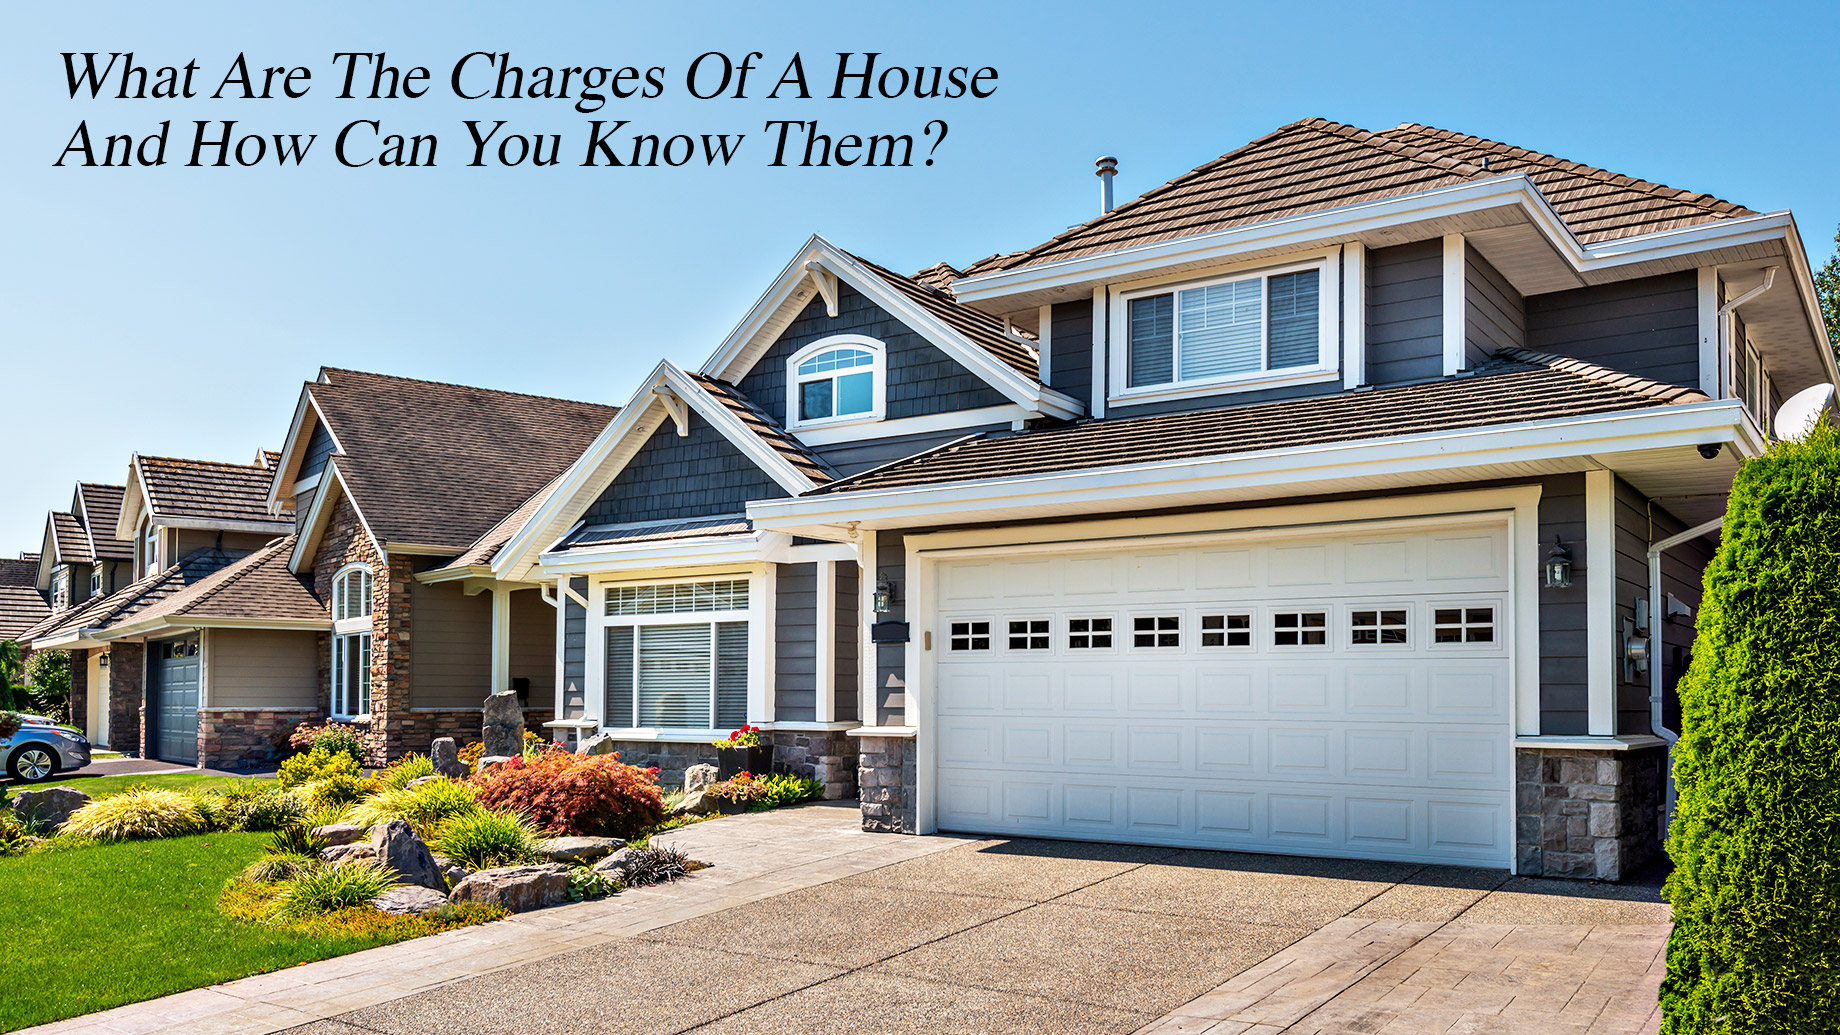 What Are The Charges Of A House And How Can You Know Them?